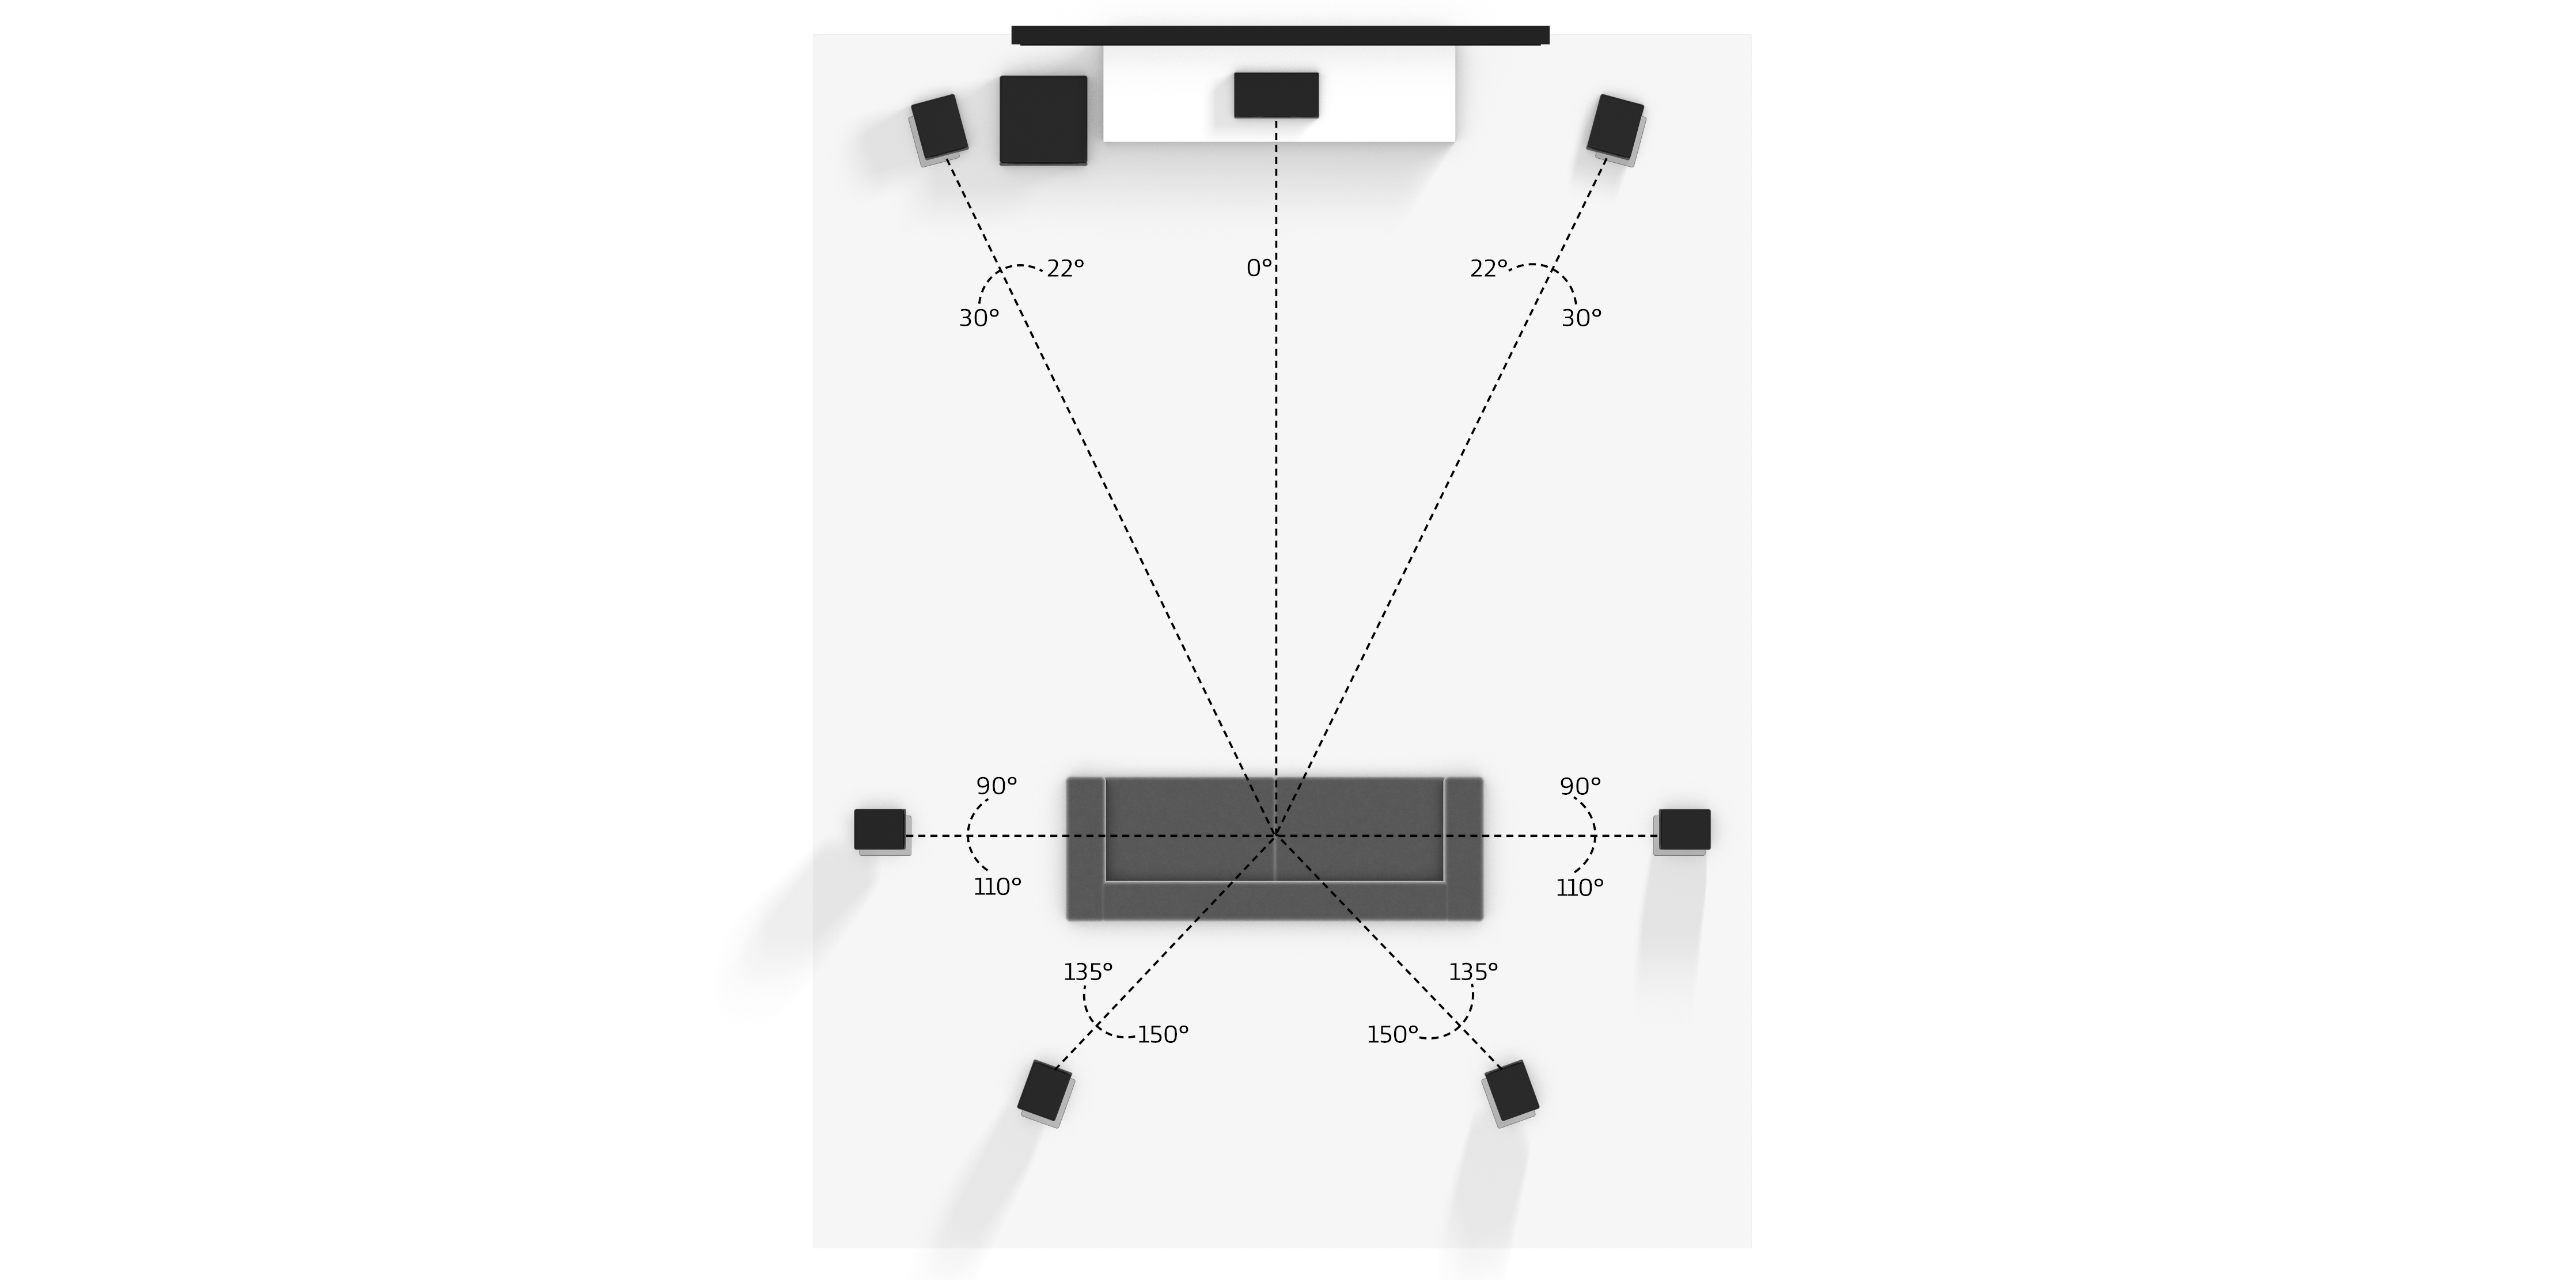 dolby atmos speaker placement 7.1.4